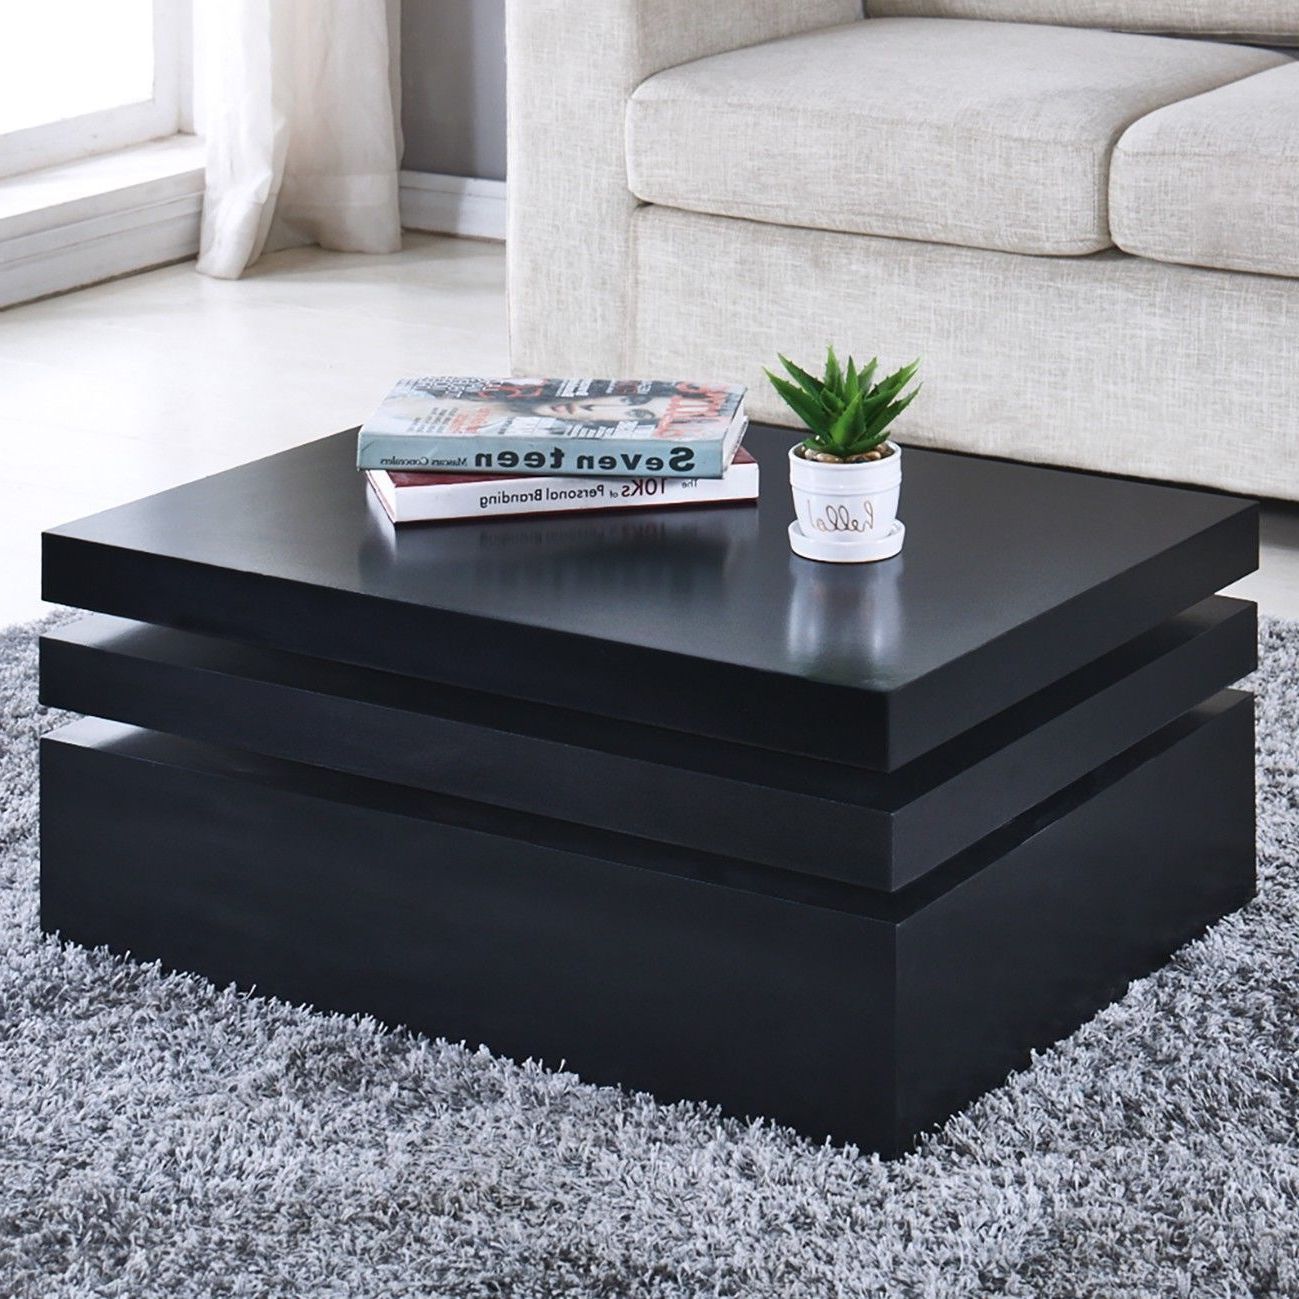 Most Recent Square High Gloss Coffee Tables In Small Square Coffee Table High Gloss Furniture Modern (Gallery 8 of 20)